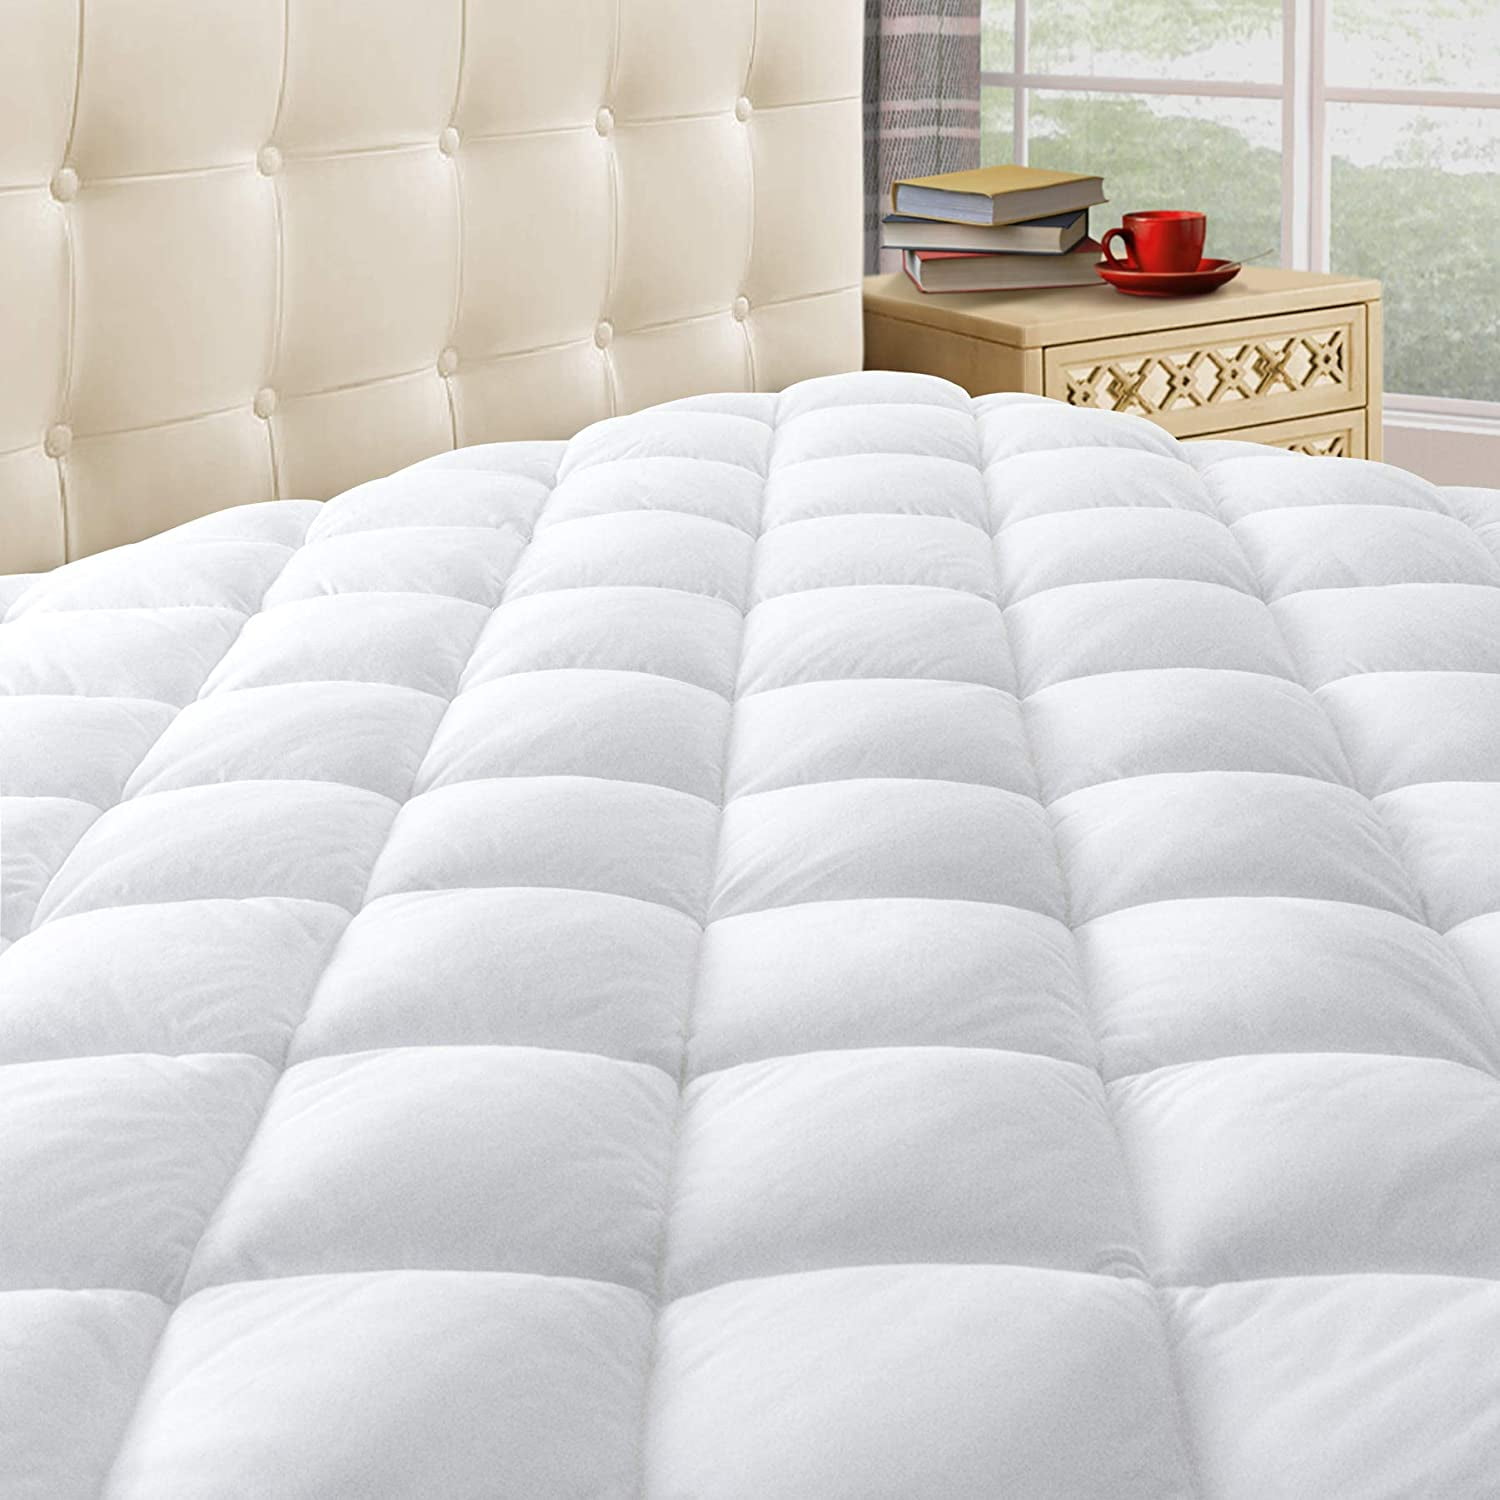 SLEEP TITE Quilted Mattress Pad with Damask Cover and Down Alte.. Free Shipping 